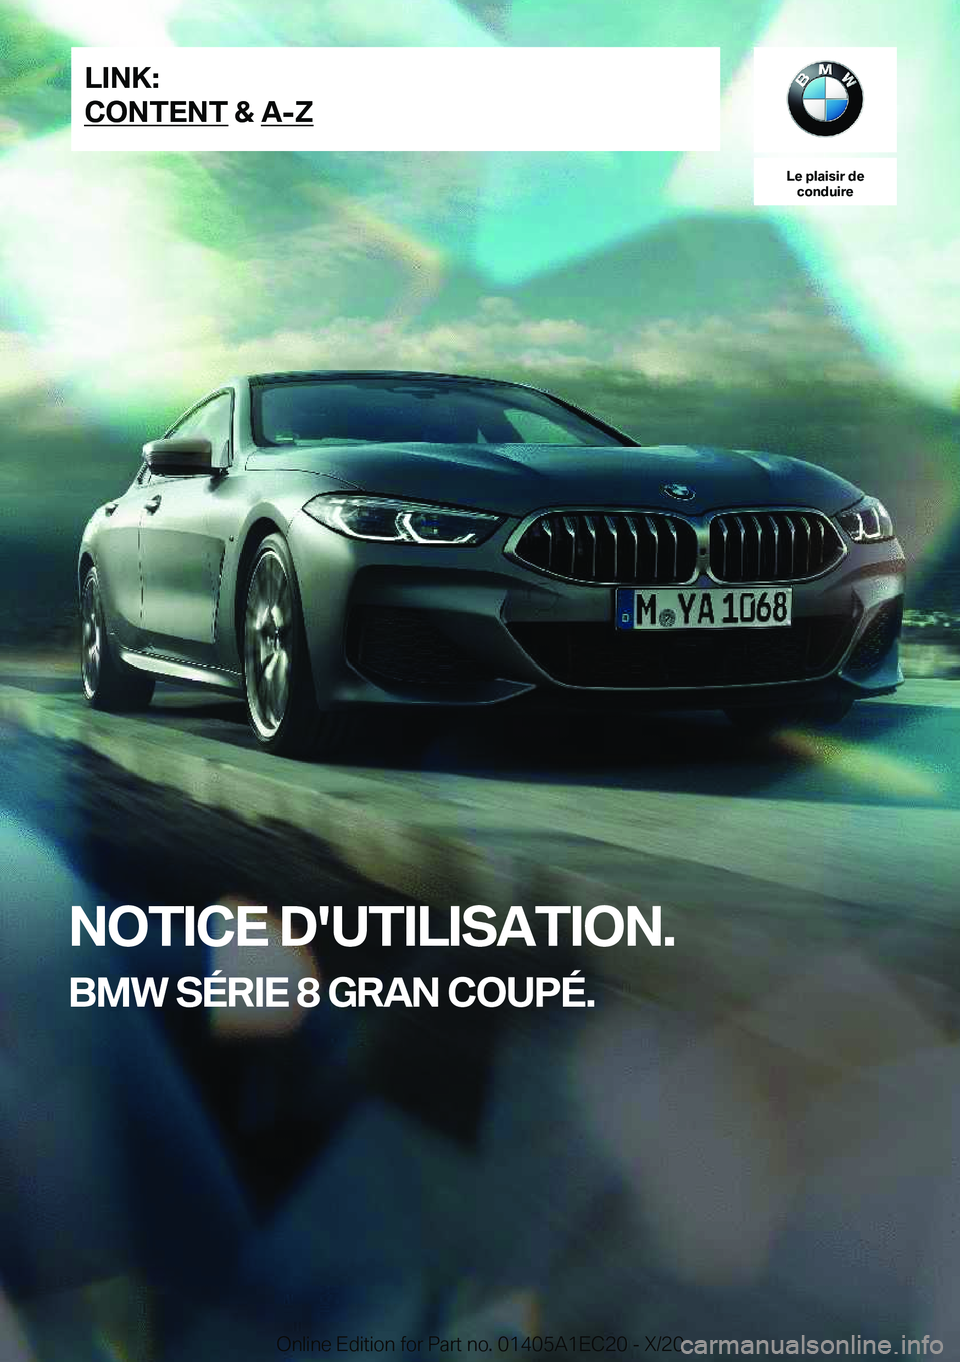 BMW 8 SERIES GRAN COUPE 2021  Notices Demploi (in French) �L�e��p�l�a�i�s�i�r��d�e�c�o�n�d�u�i�r�e
�N�O�T�I�C�E��D�'�U�T�I�L�I�S�A�T�I�O�N�.
�B�M�W��S�